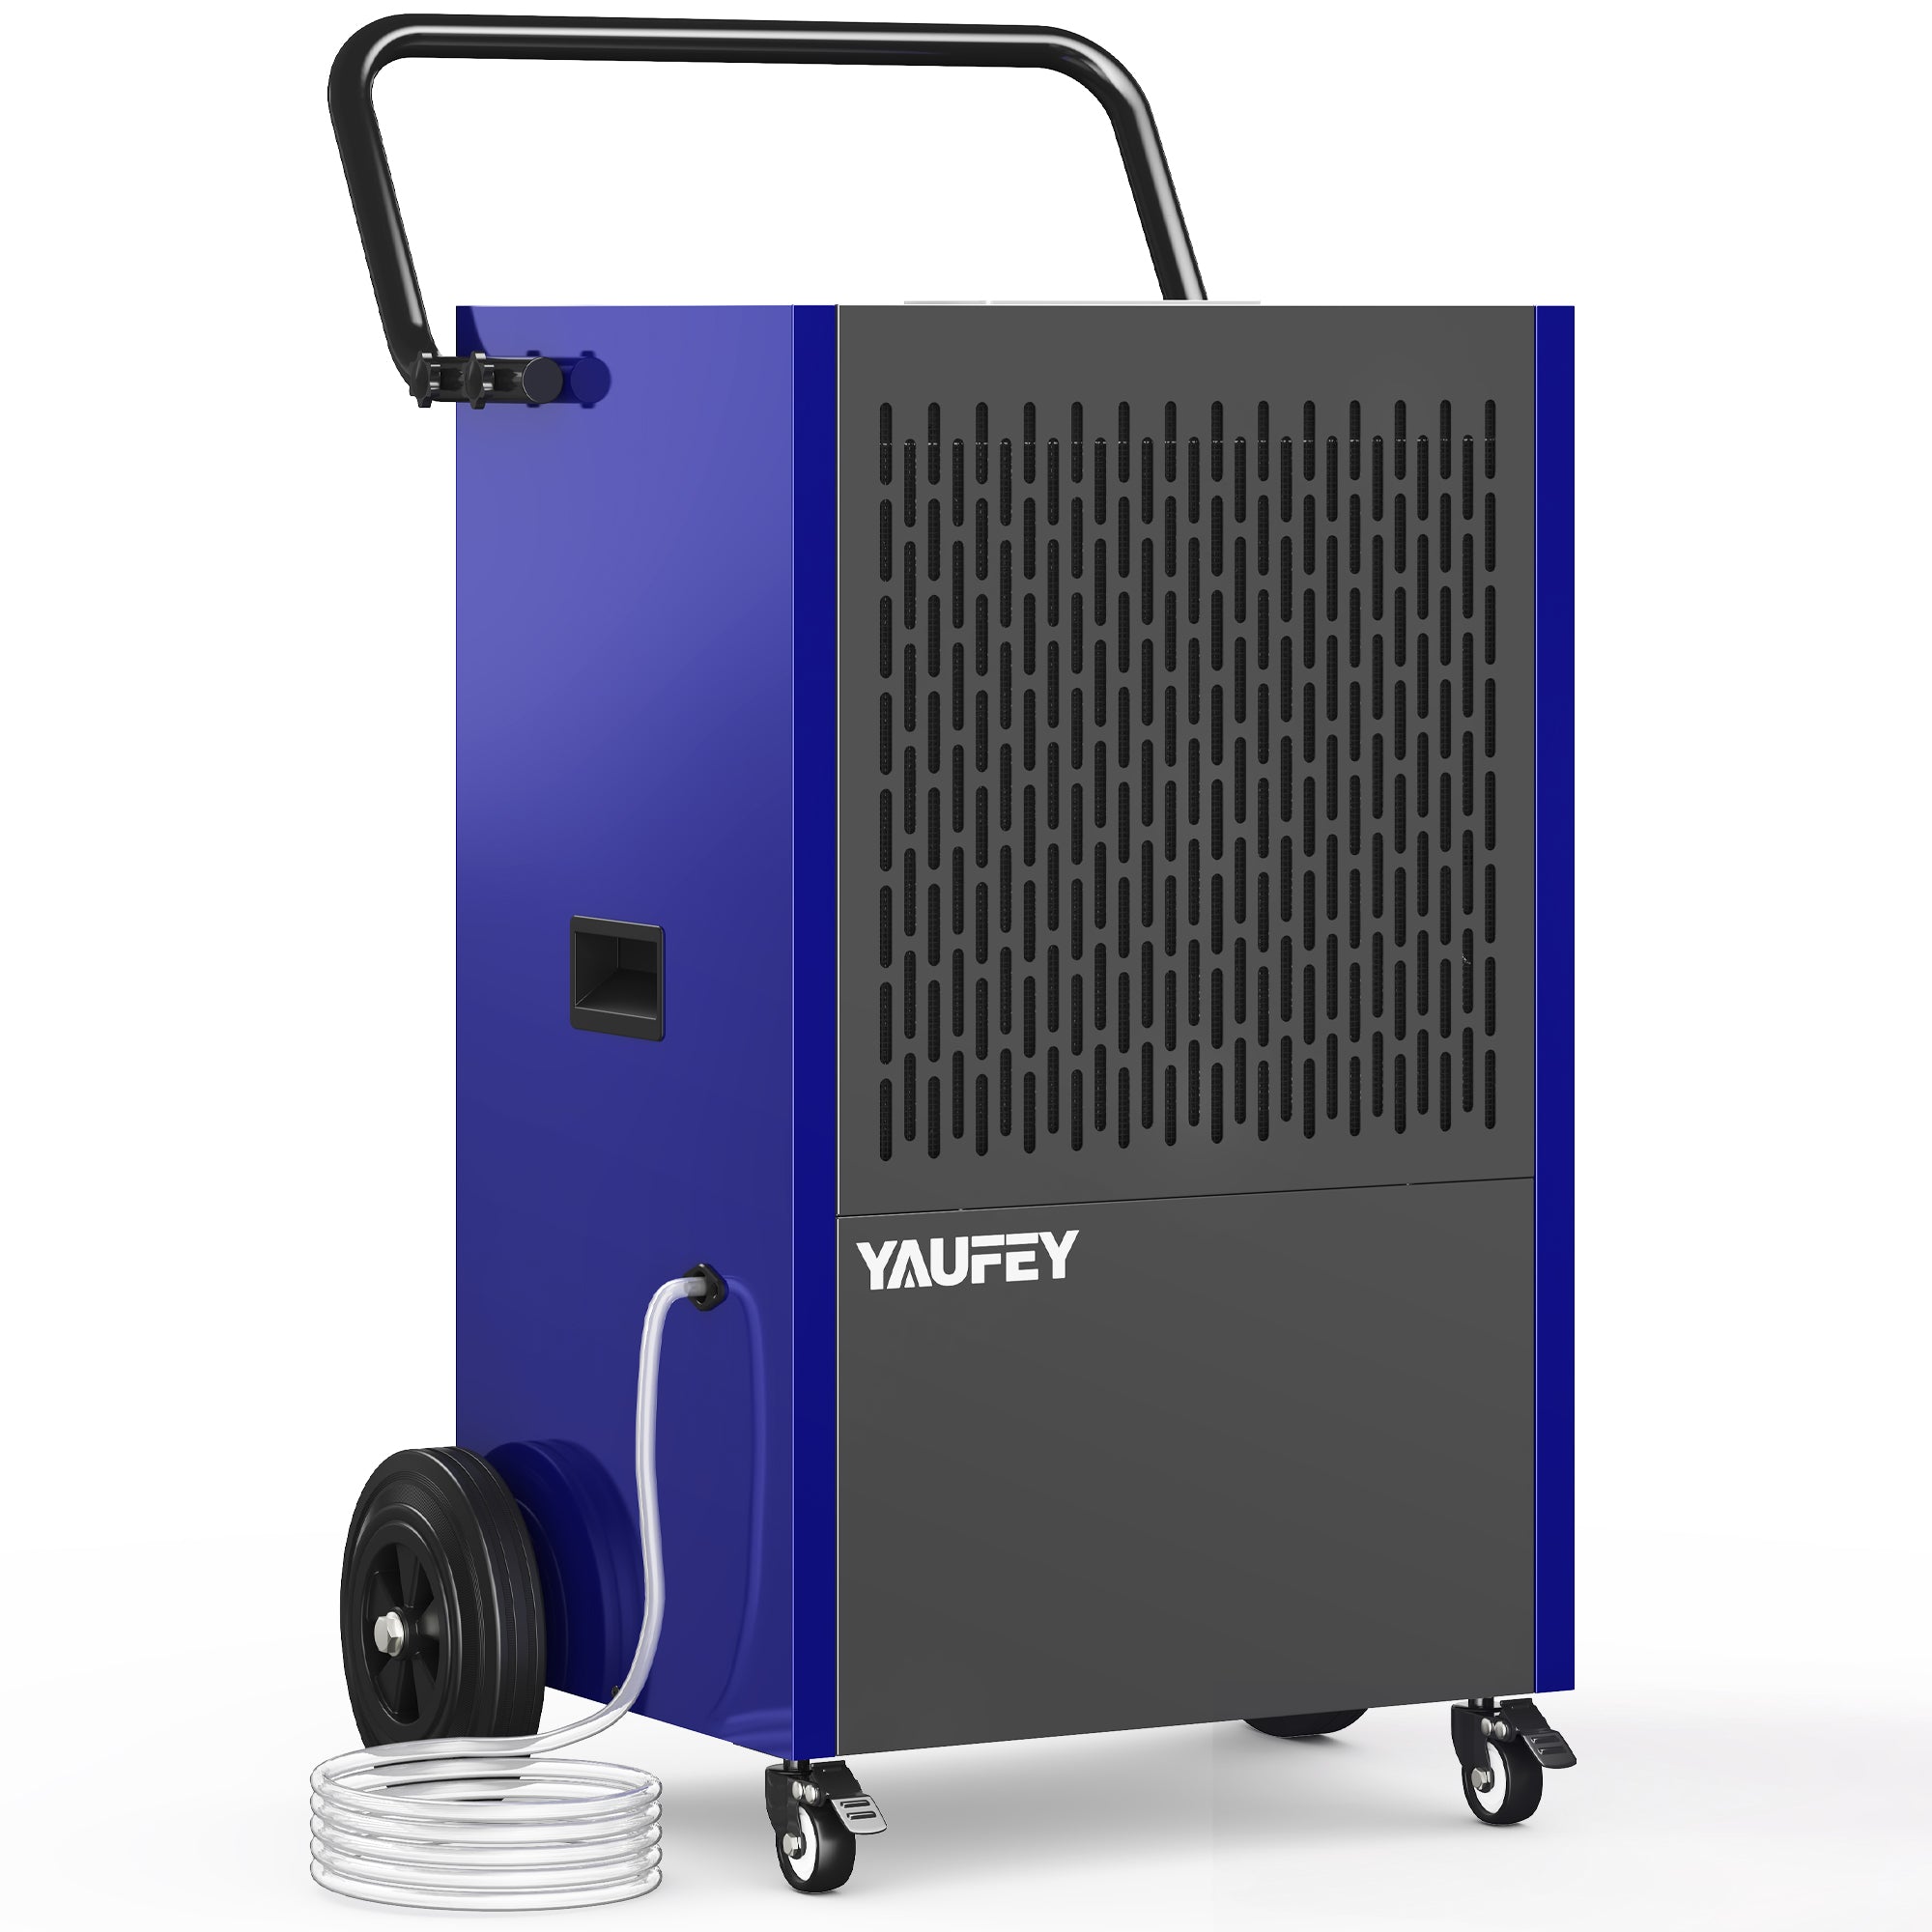 Yaufey Commercial Dehumidifier with Pump and Drain Hose, 216 Pints Dehumidifier for Basement, Intelligent Humidity Control, Large Capacity Industrial Dehumidifier for Large Room up to 8500 Sq. Ft (Model: DP905C)